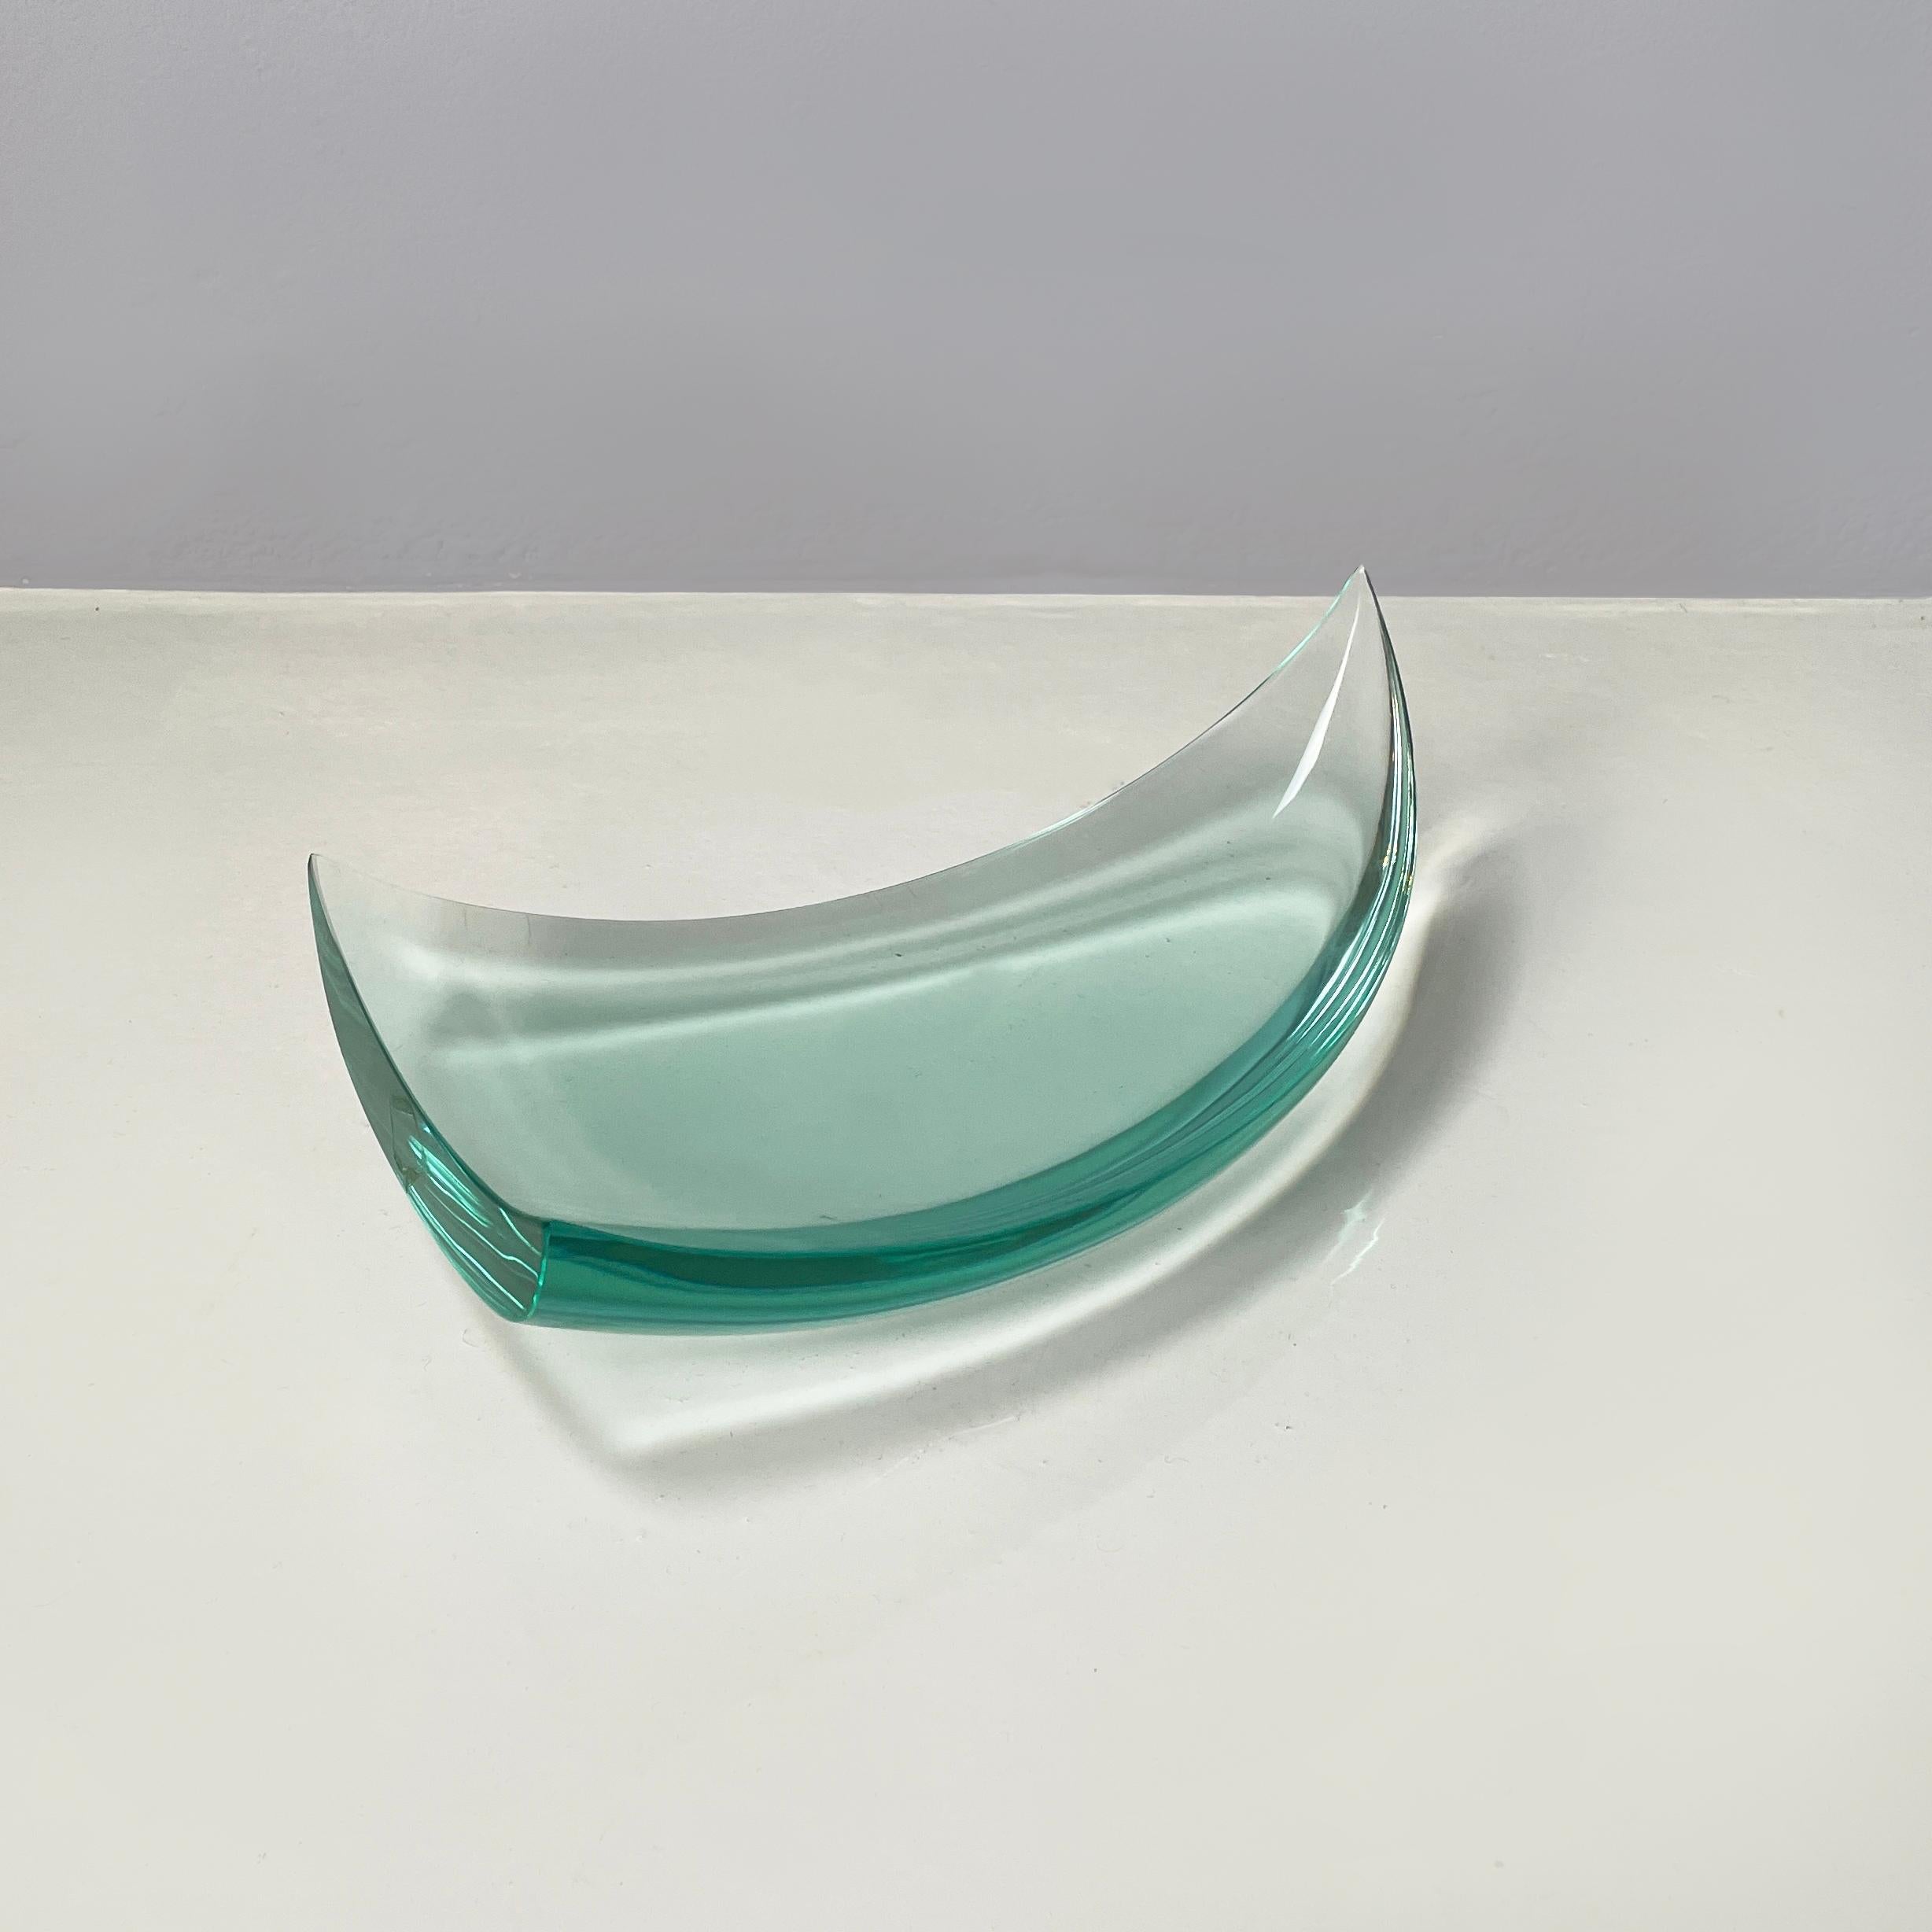 Italian mid-century modern Sail-shaped object holder or Centerpiece by Fontana Arte, 1960s
Sail-shaped object holder made entirely of thick, water-green glass. The tips of the triangle are raised, while the center has a hollow. It can be used as a